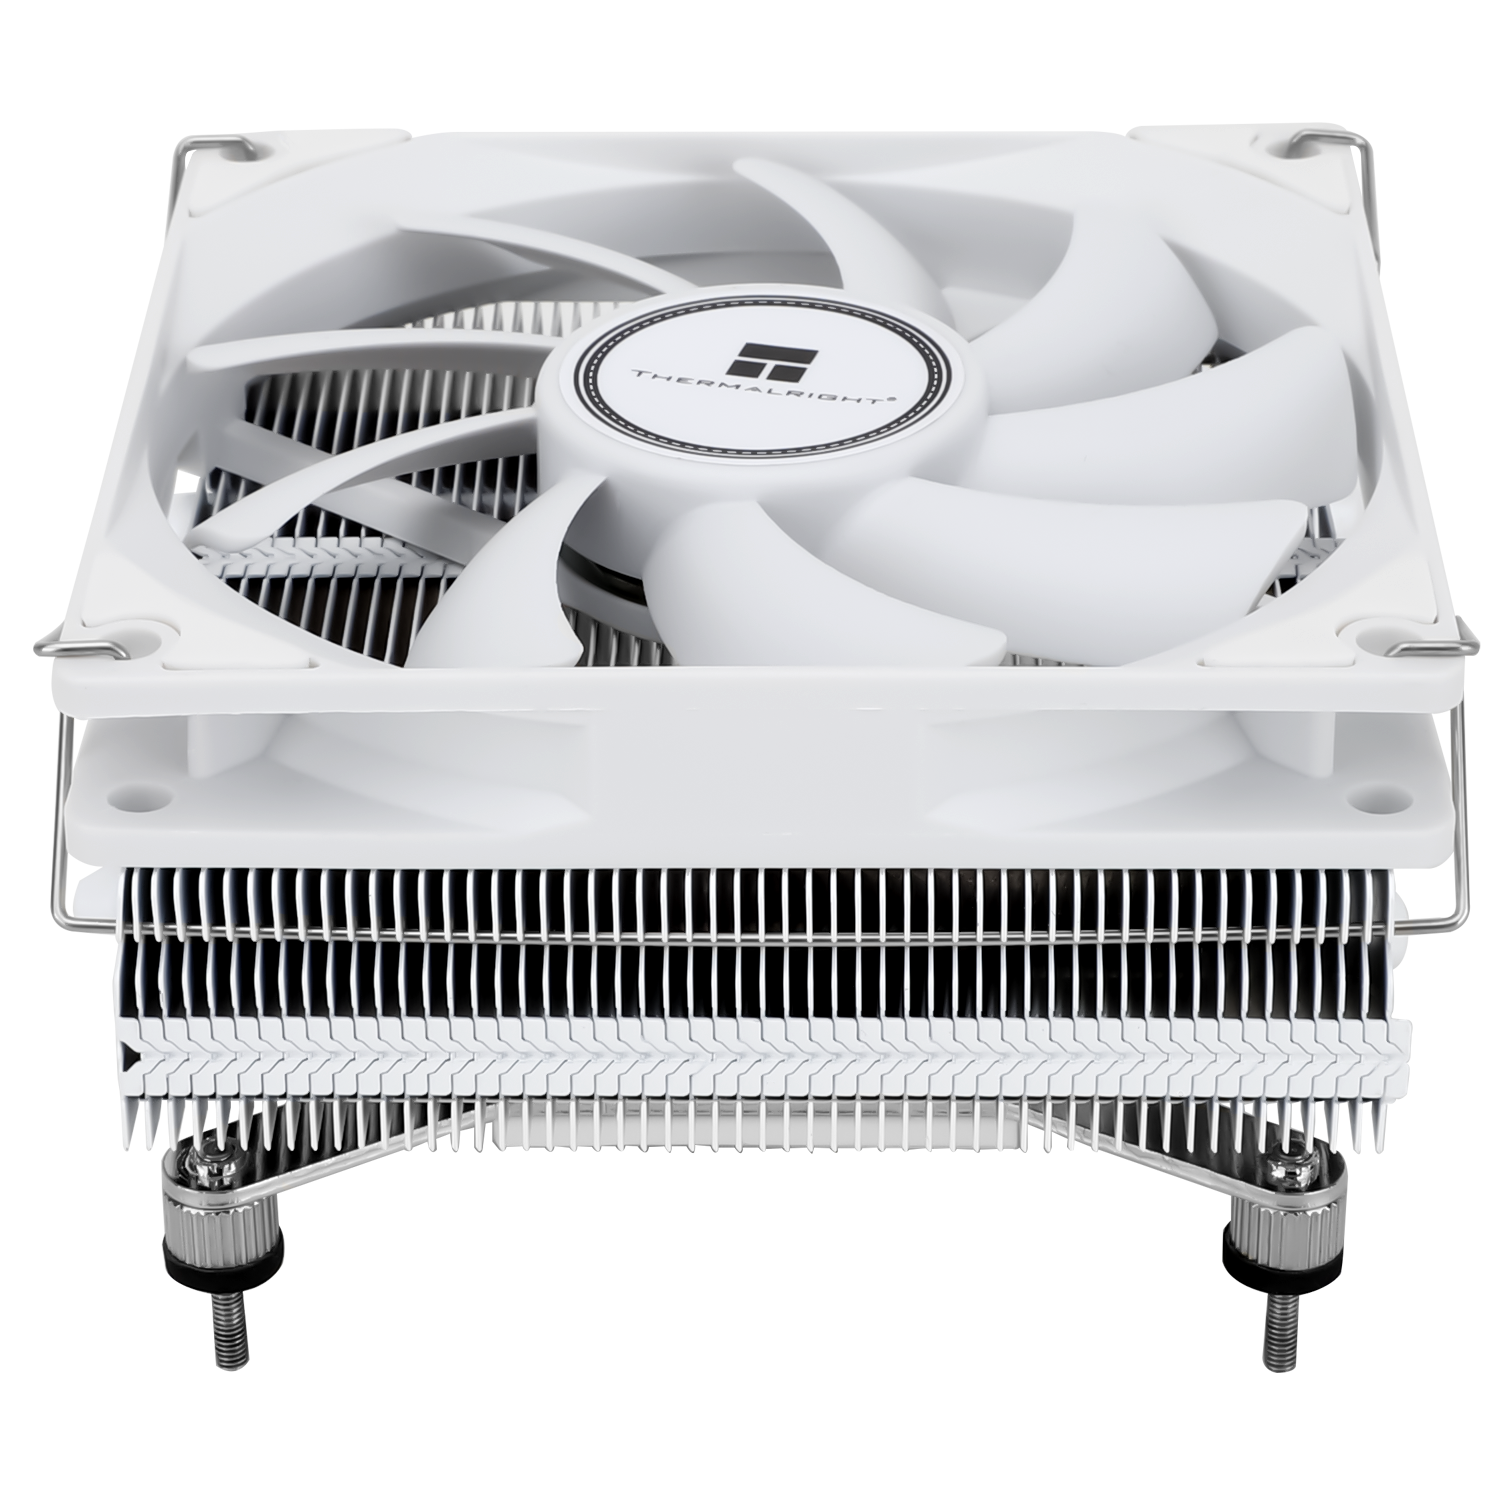 Thermalright AXP90-X47 WHITE Low-Profile 下吹式風冷